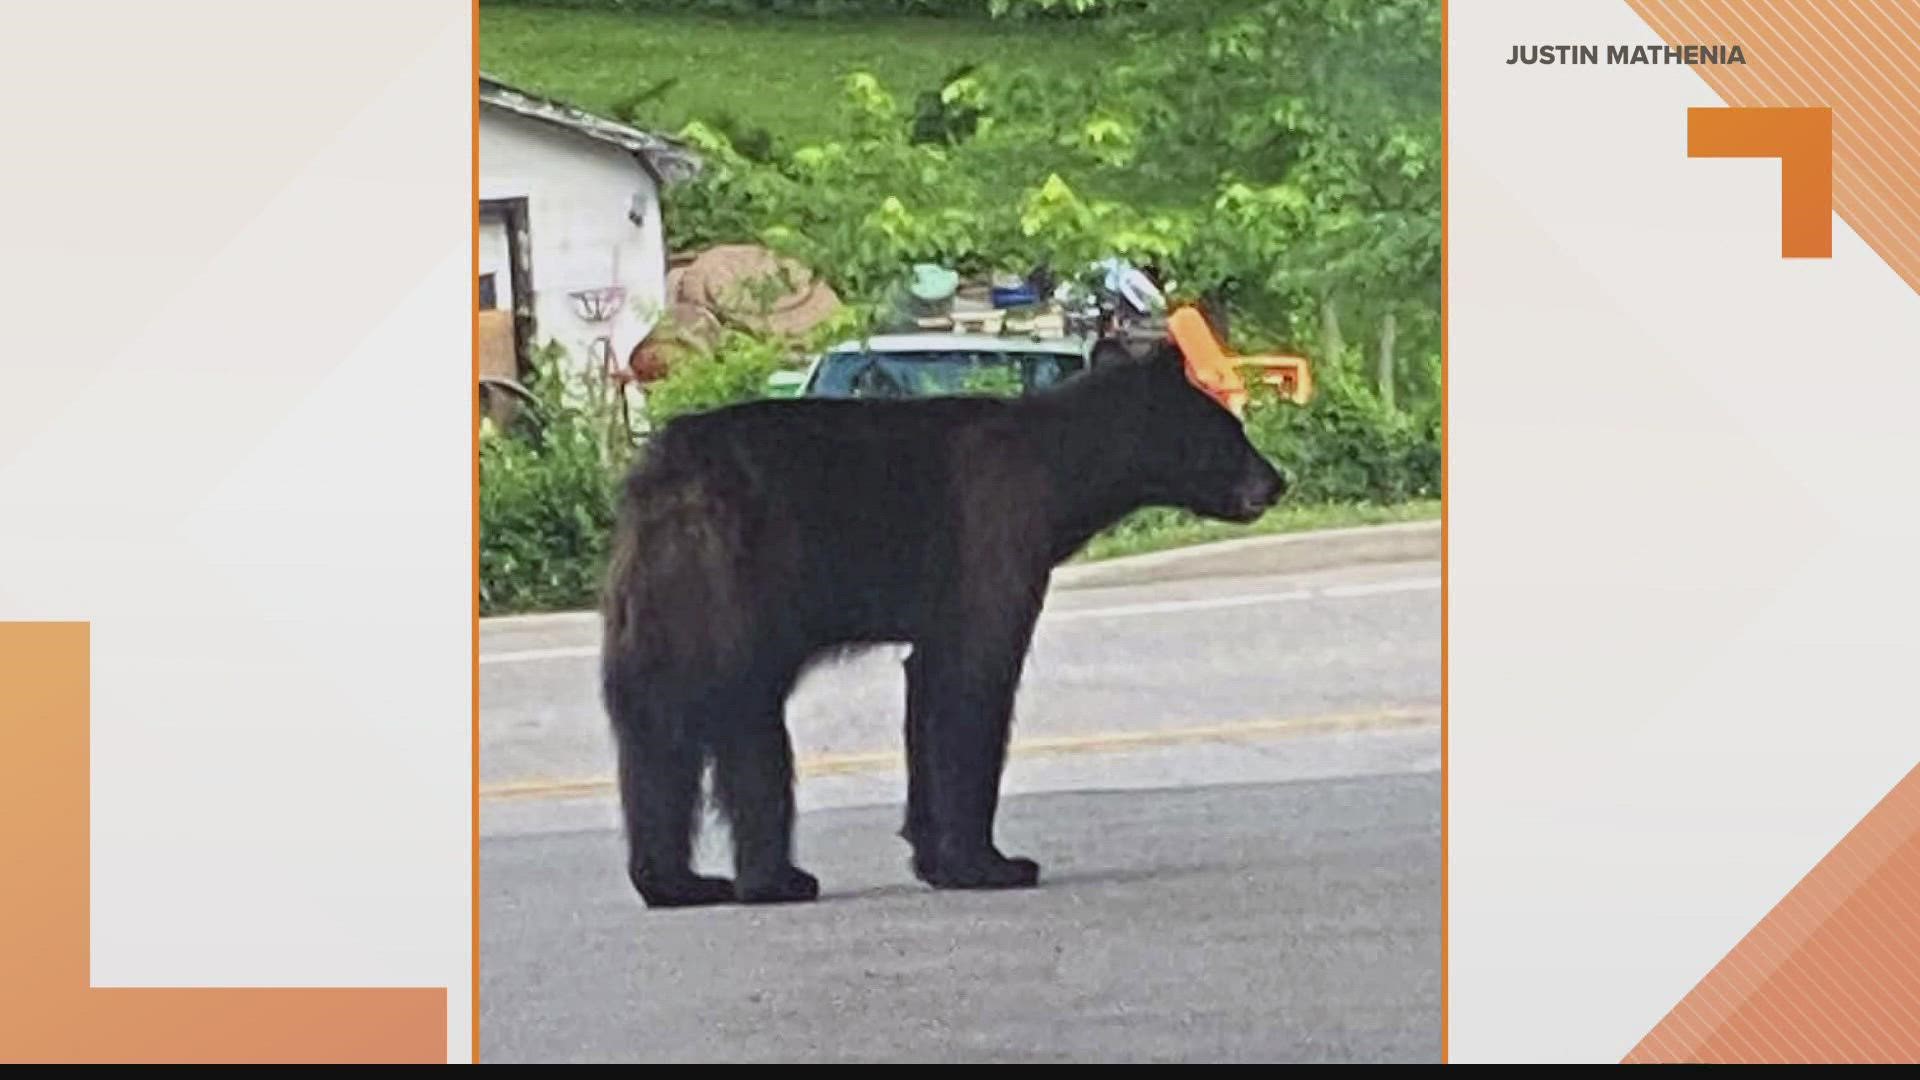 A sad update on the black bear spotted roaming through Fenton the last few days. Police said the bear has died.